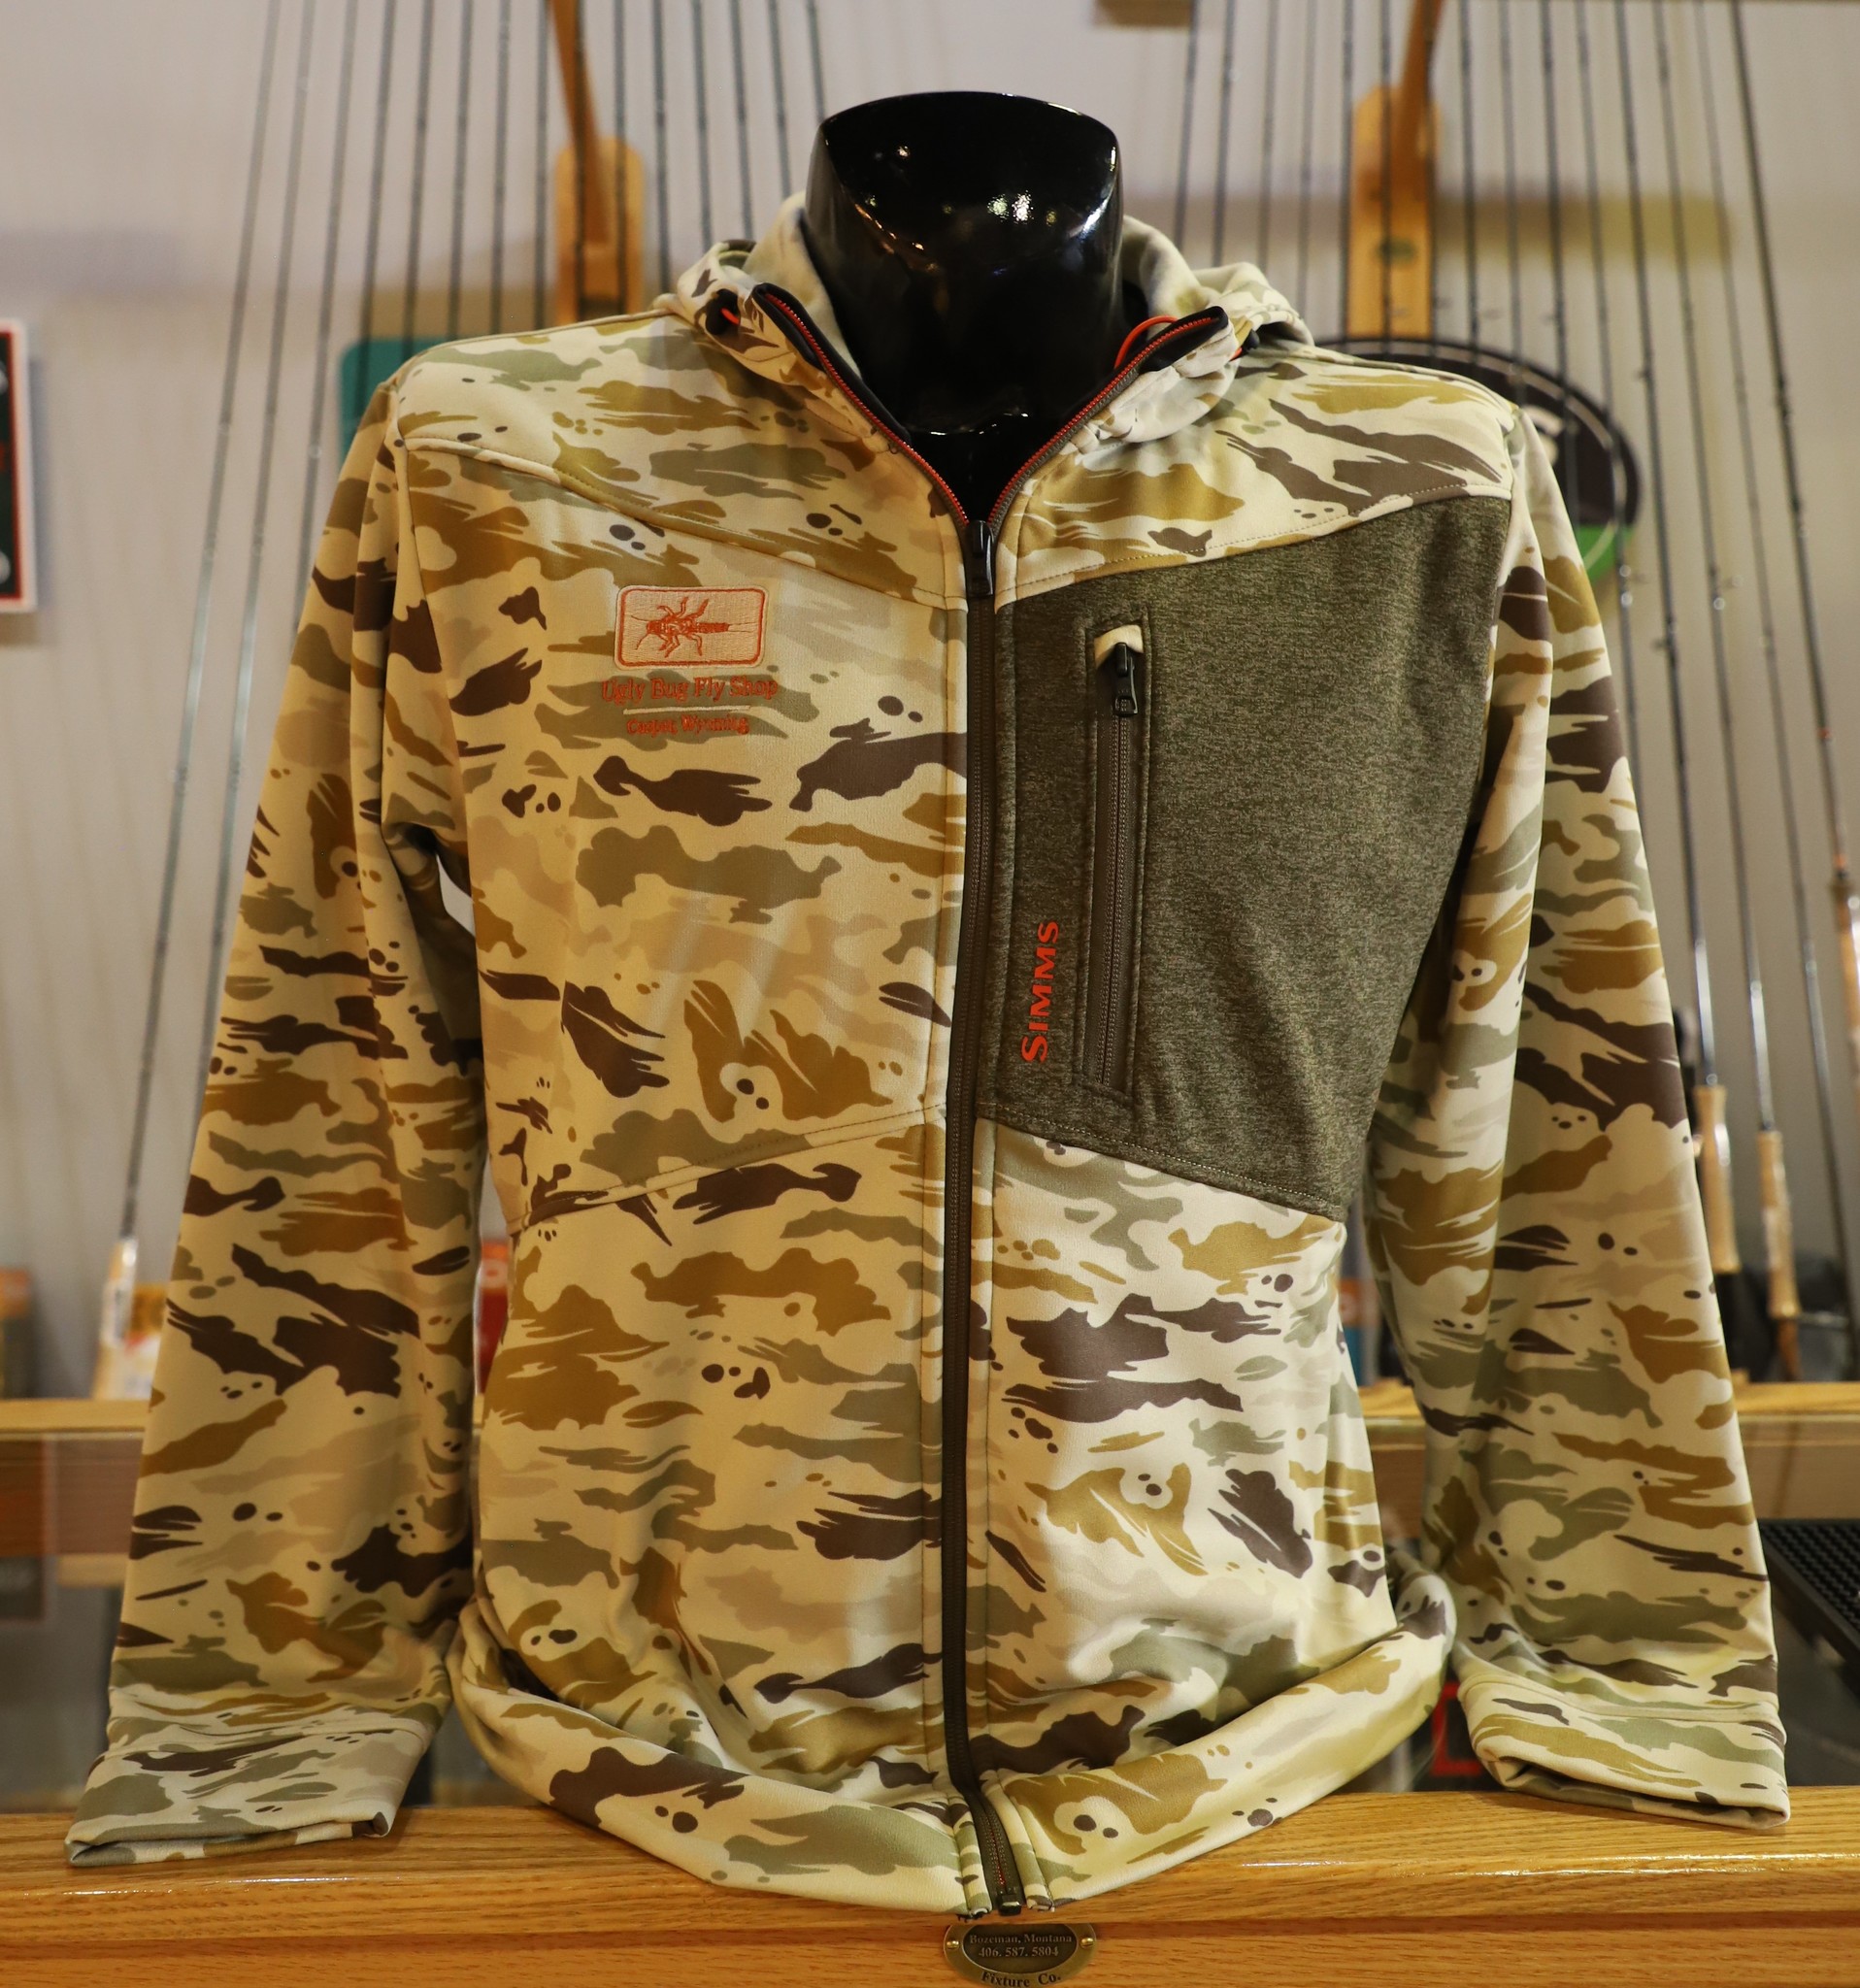 SIMMS CX HOODY WITH UGLY BUG LOGO FULL ZIP GHOST CAMO